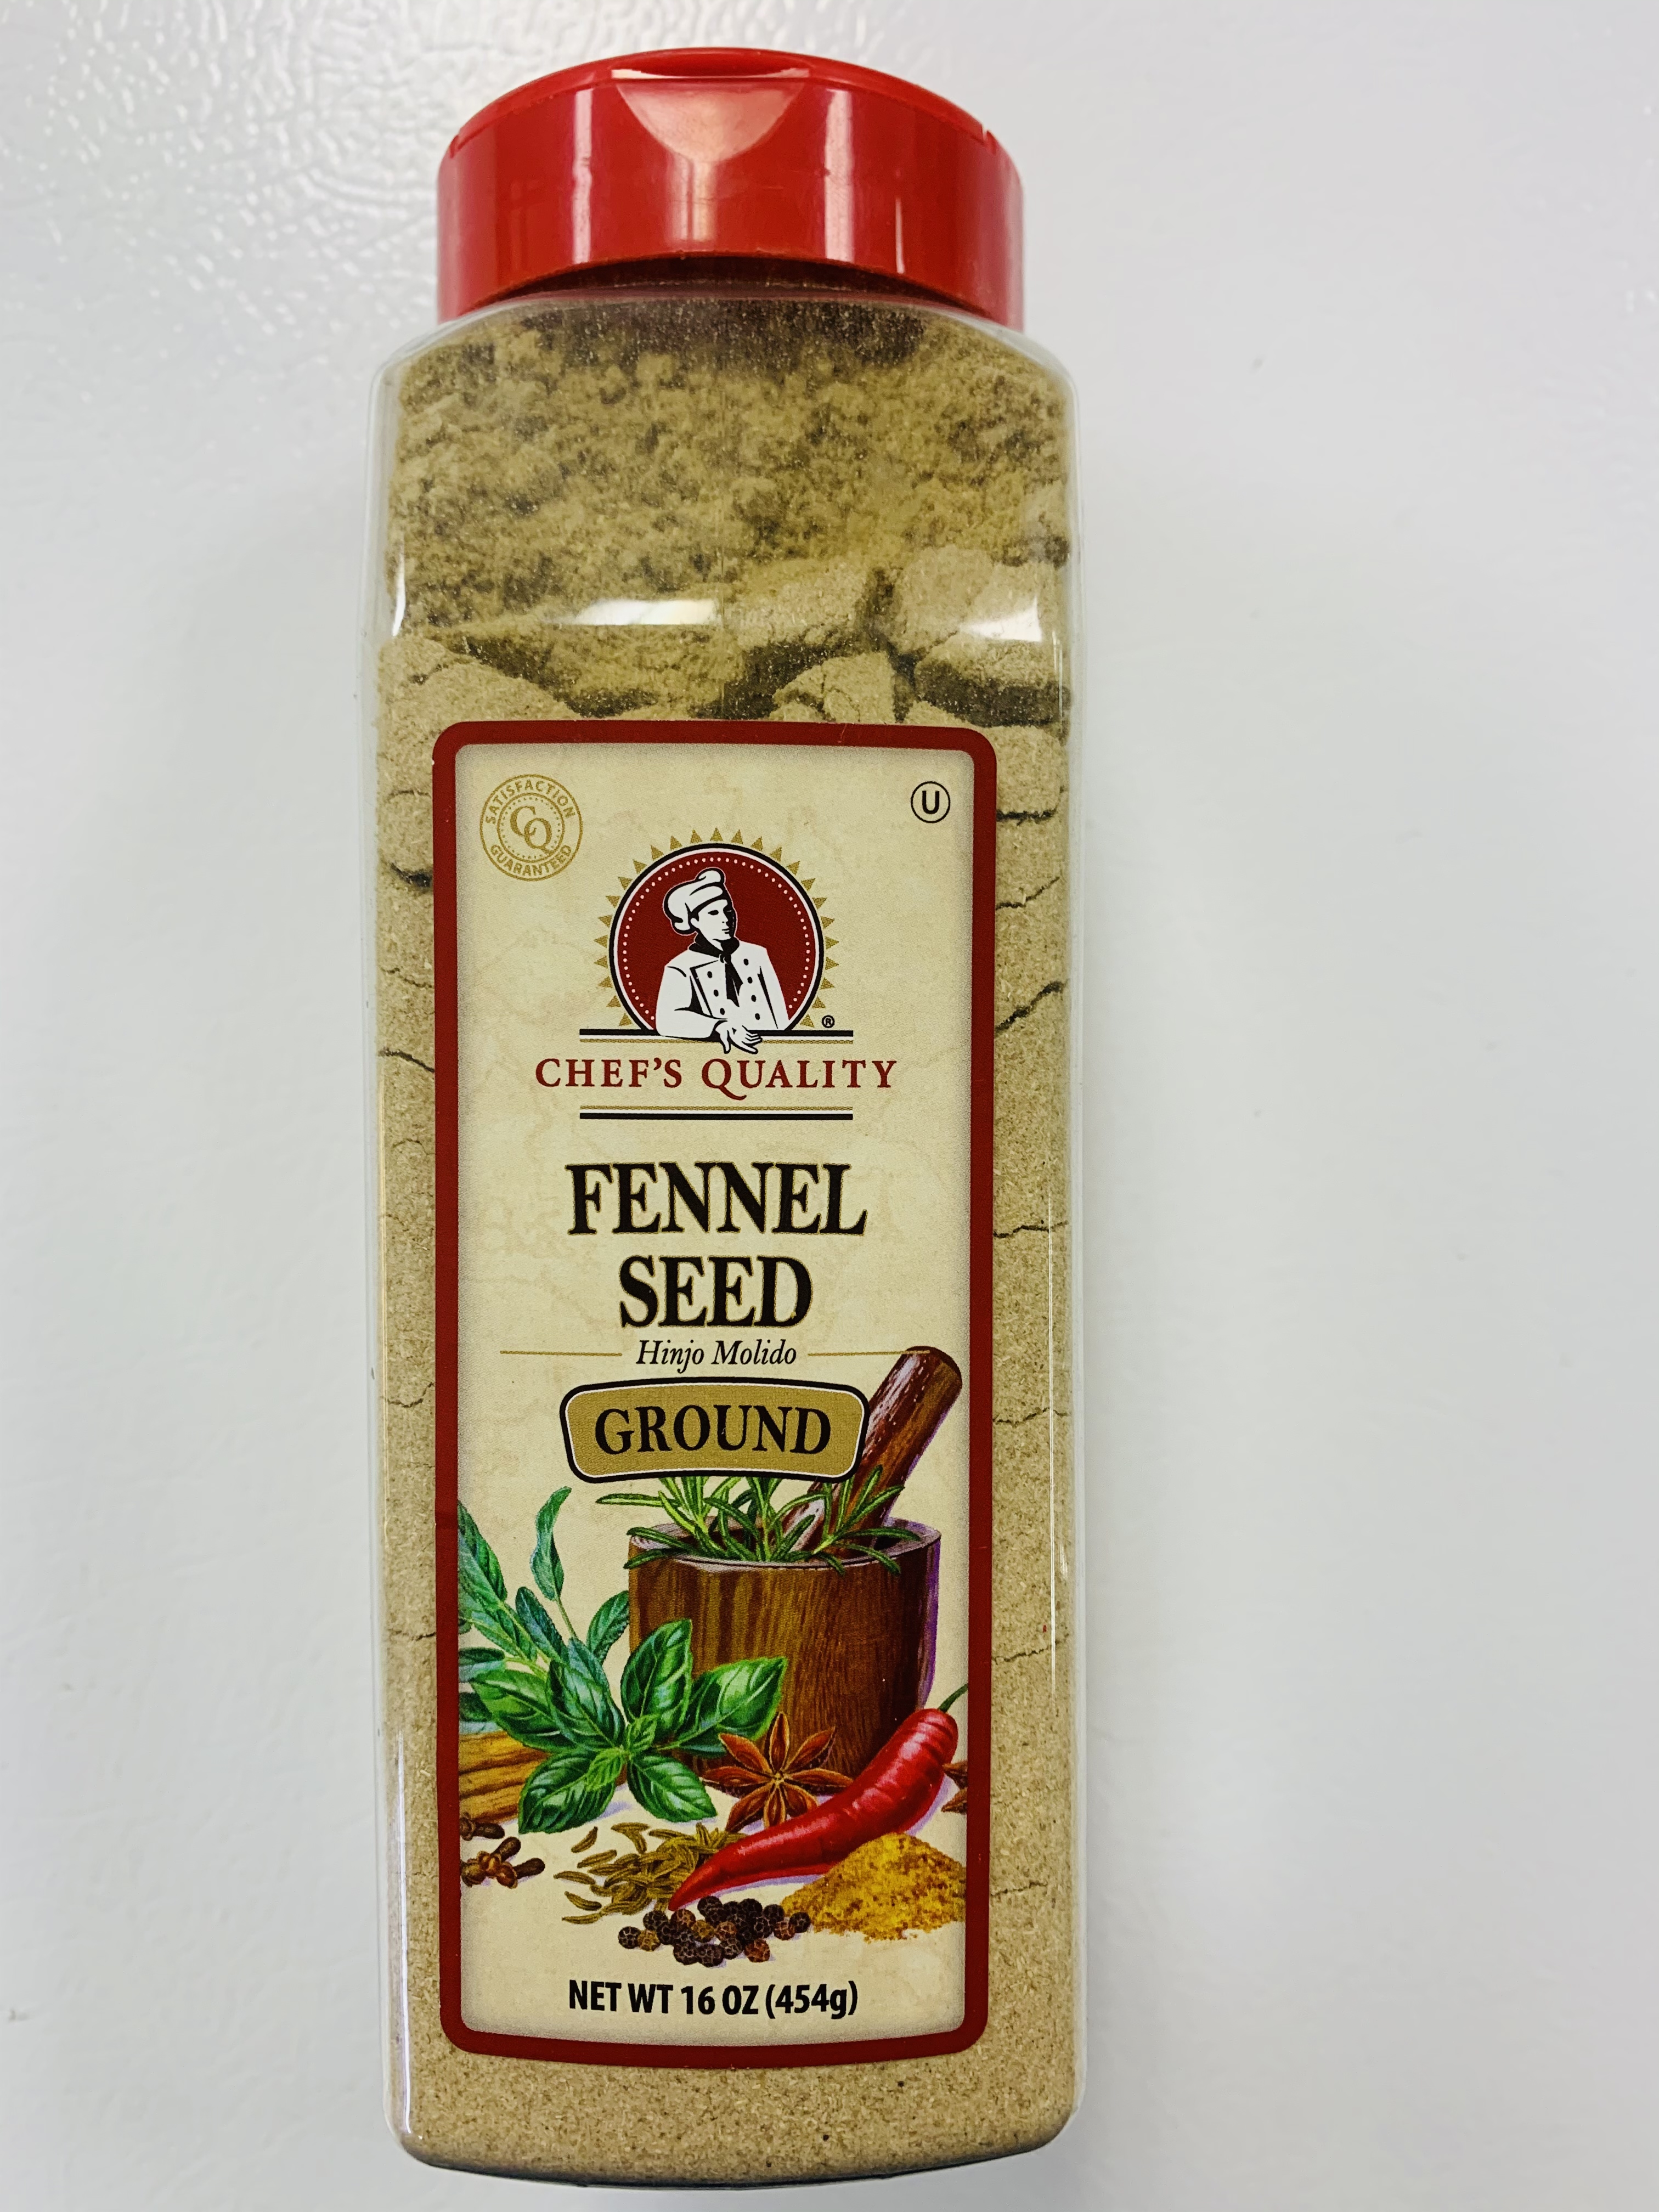 FENNEL SEED (Ground) - شومر مطحون<br>$8.99